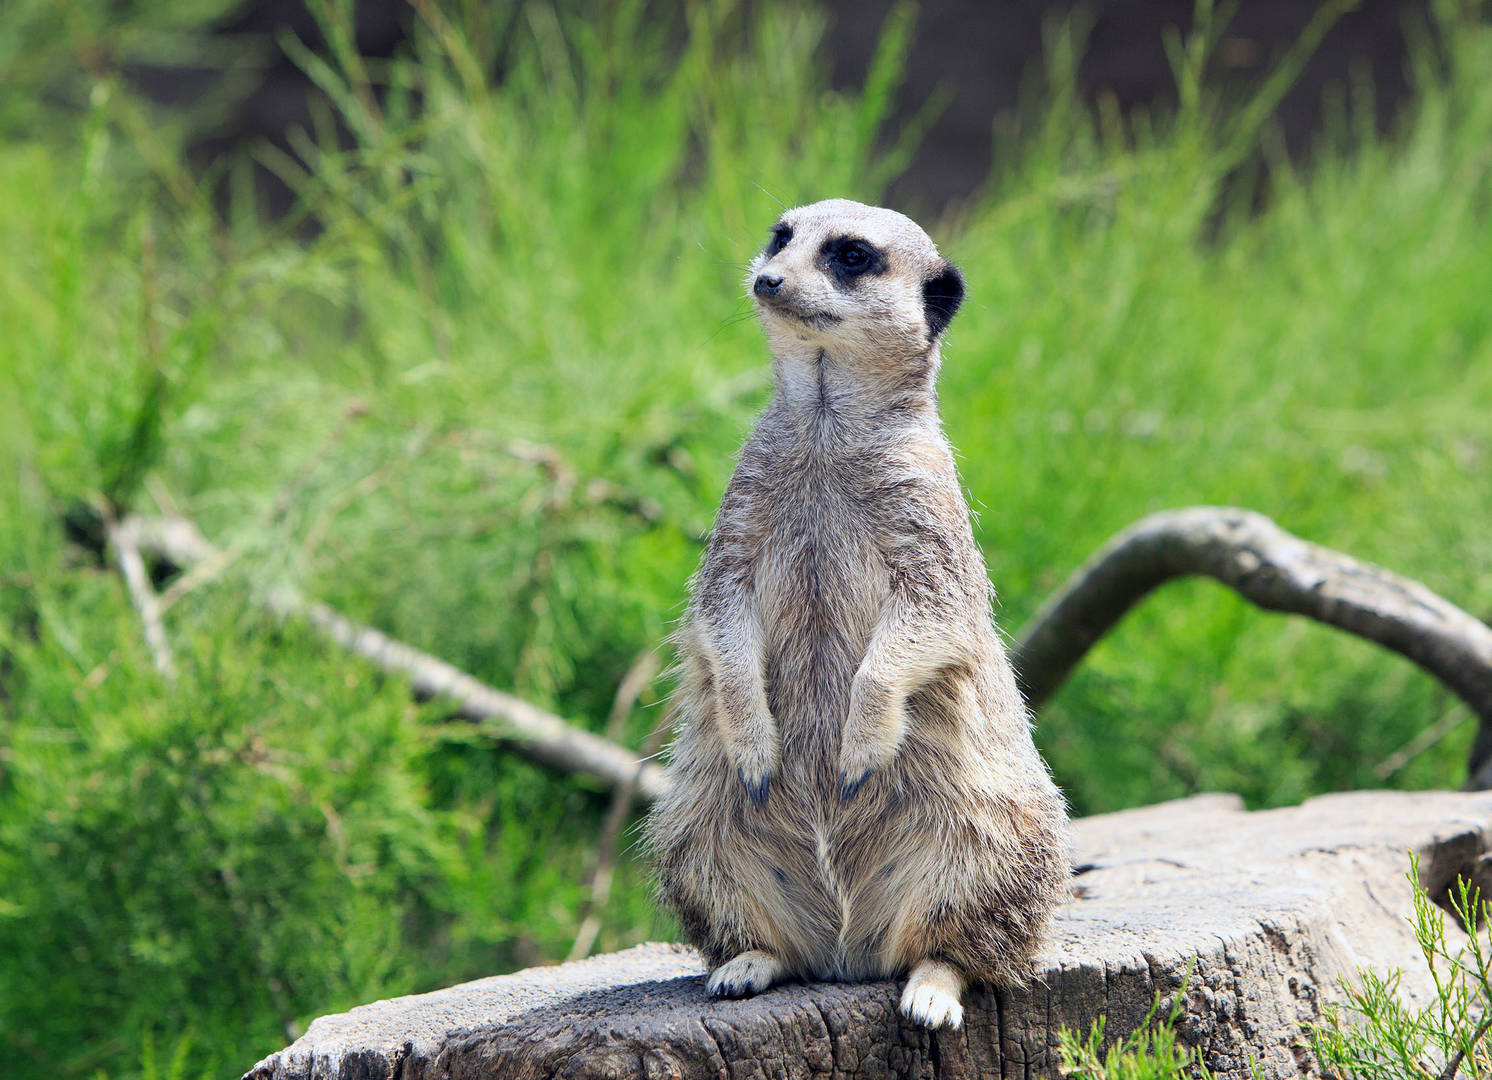 A meerkat at the zoo in London